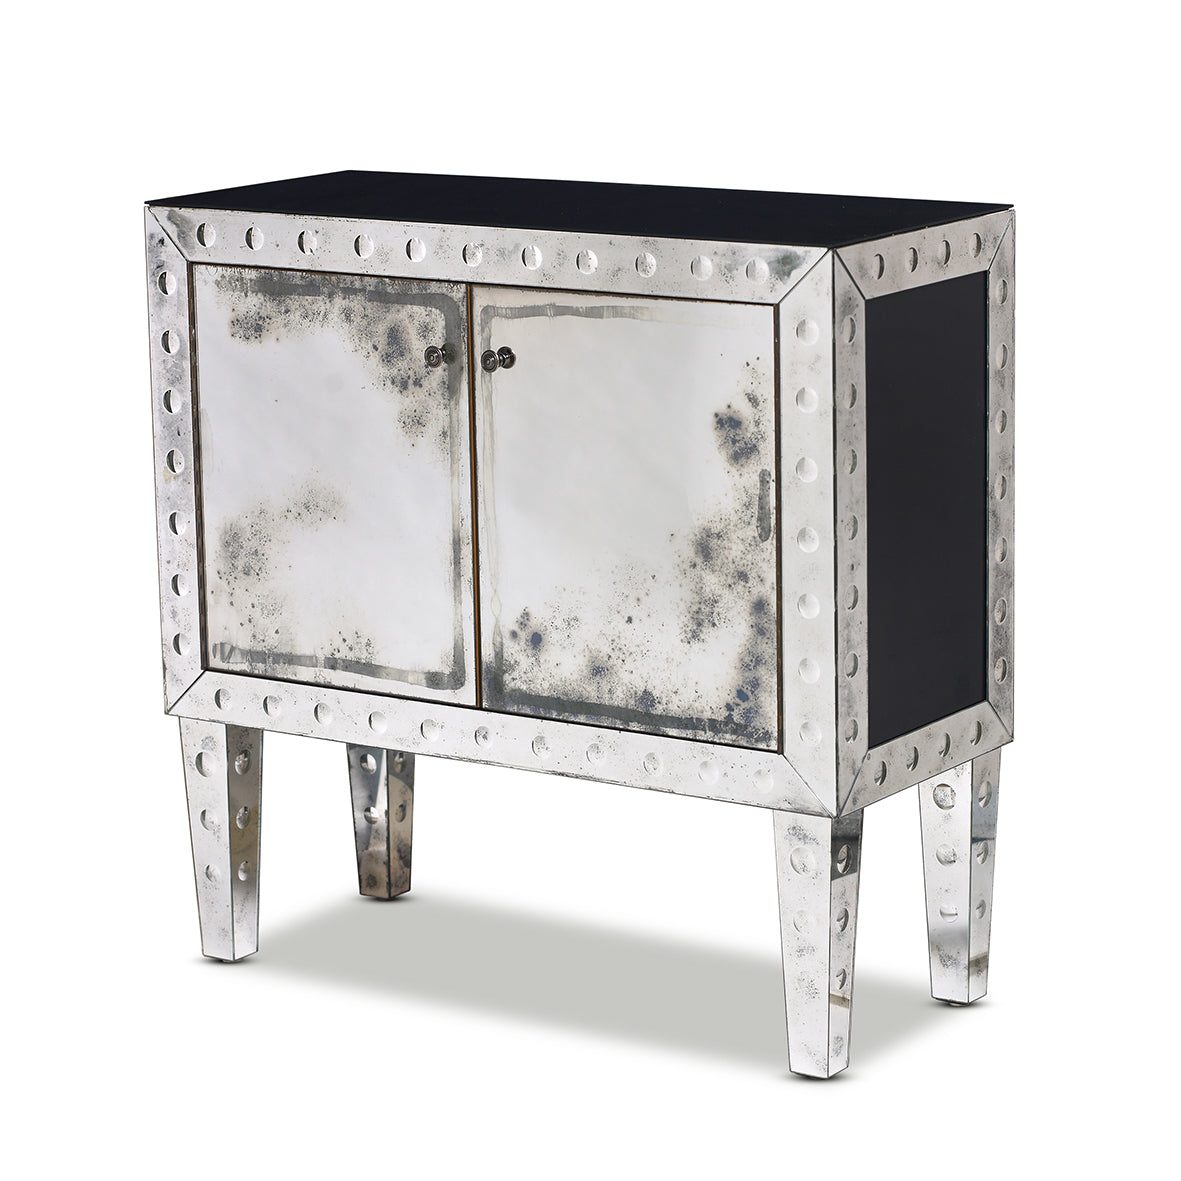 SOLD A fine quality mirrored and black glass etched cocktail cabinet, Italian Circa 1960